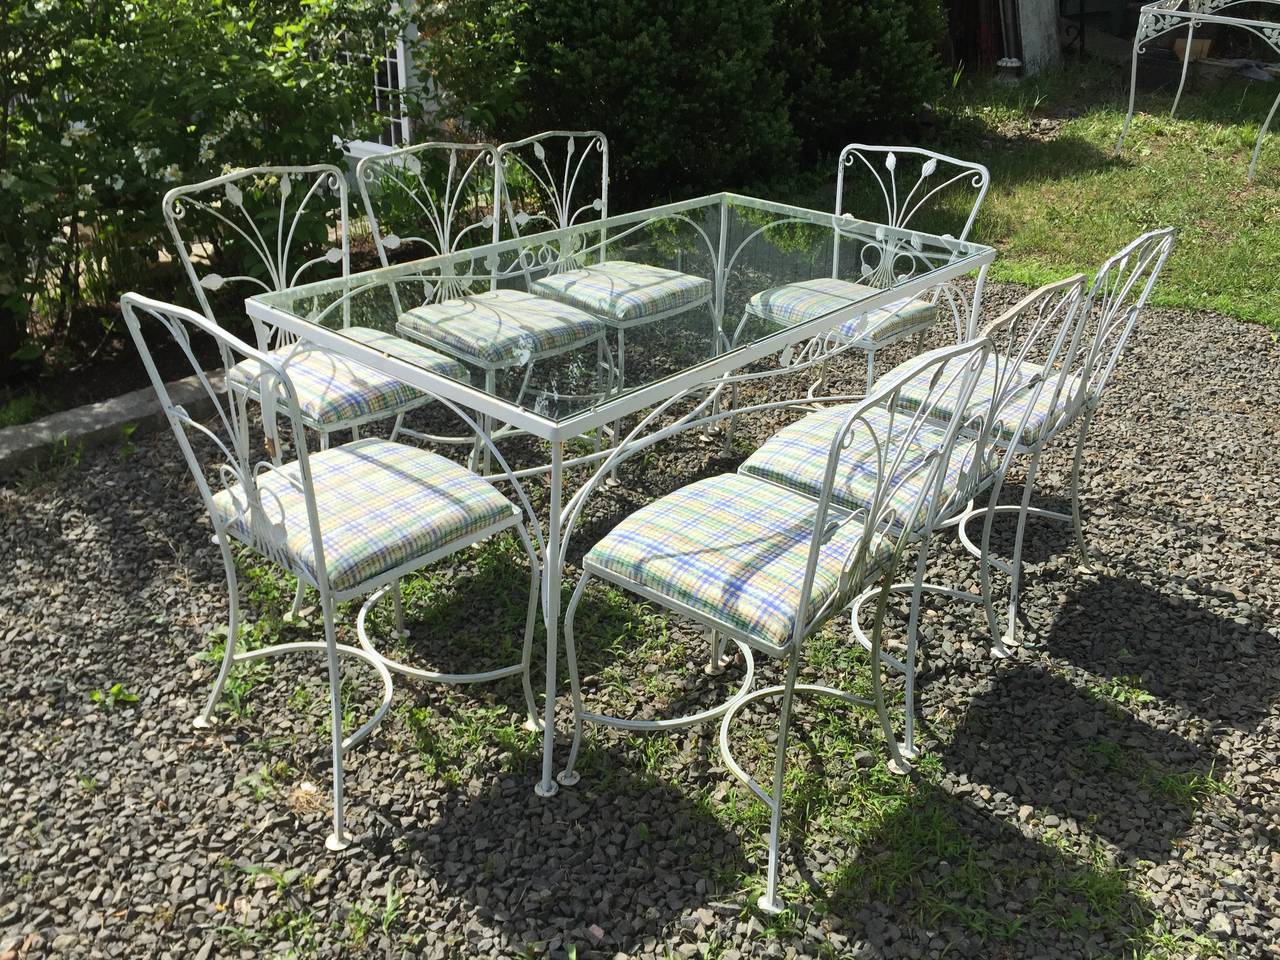 This wonderful vintage zinc-coated wrought iron dining suite in a charming ivy pattern is attributed to the famous American maker, Salterini, and dates to the mid-20th century. It features a large rectangular glass-topped table and eight side